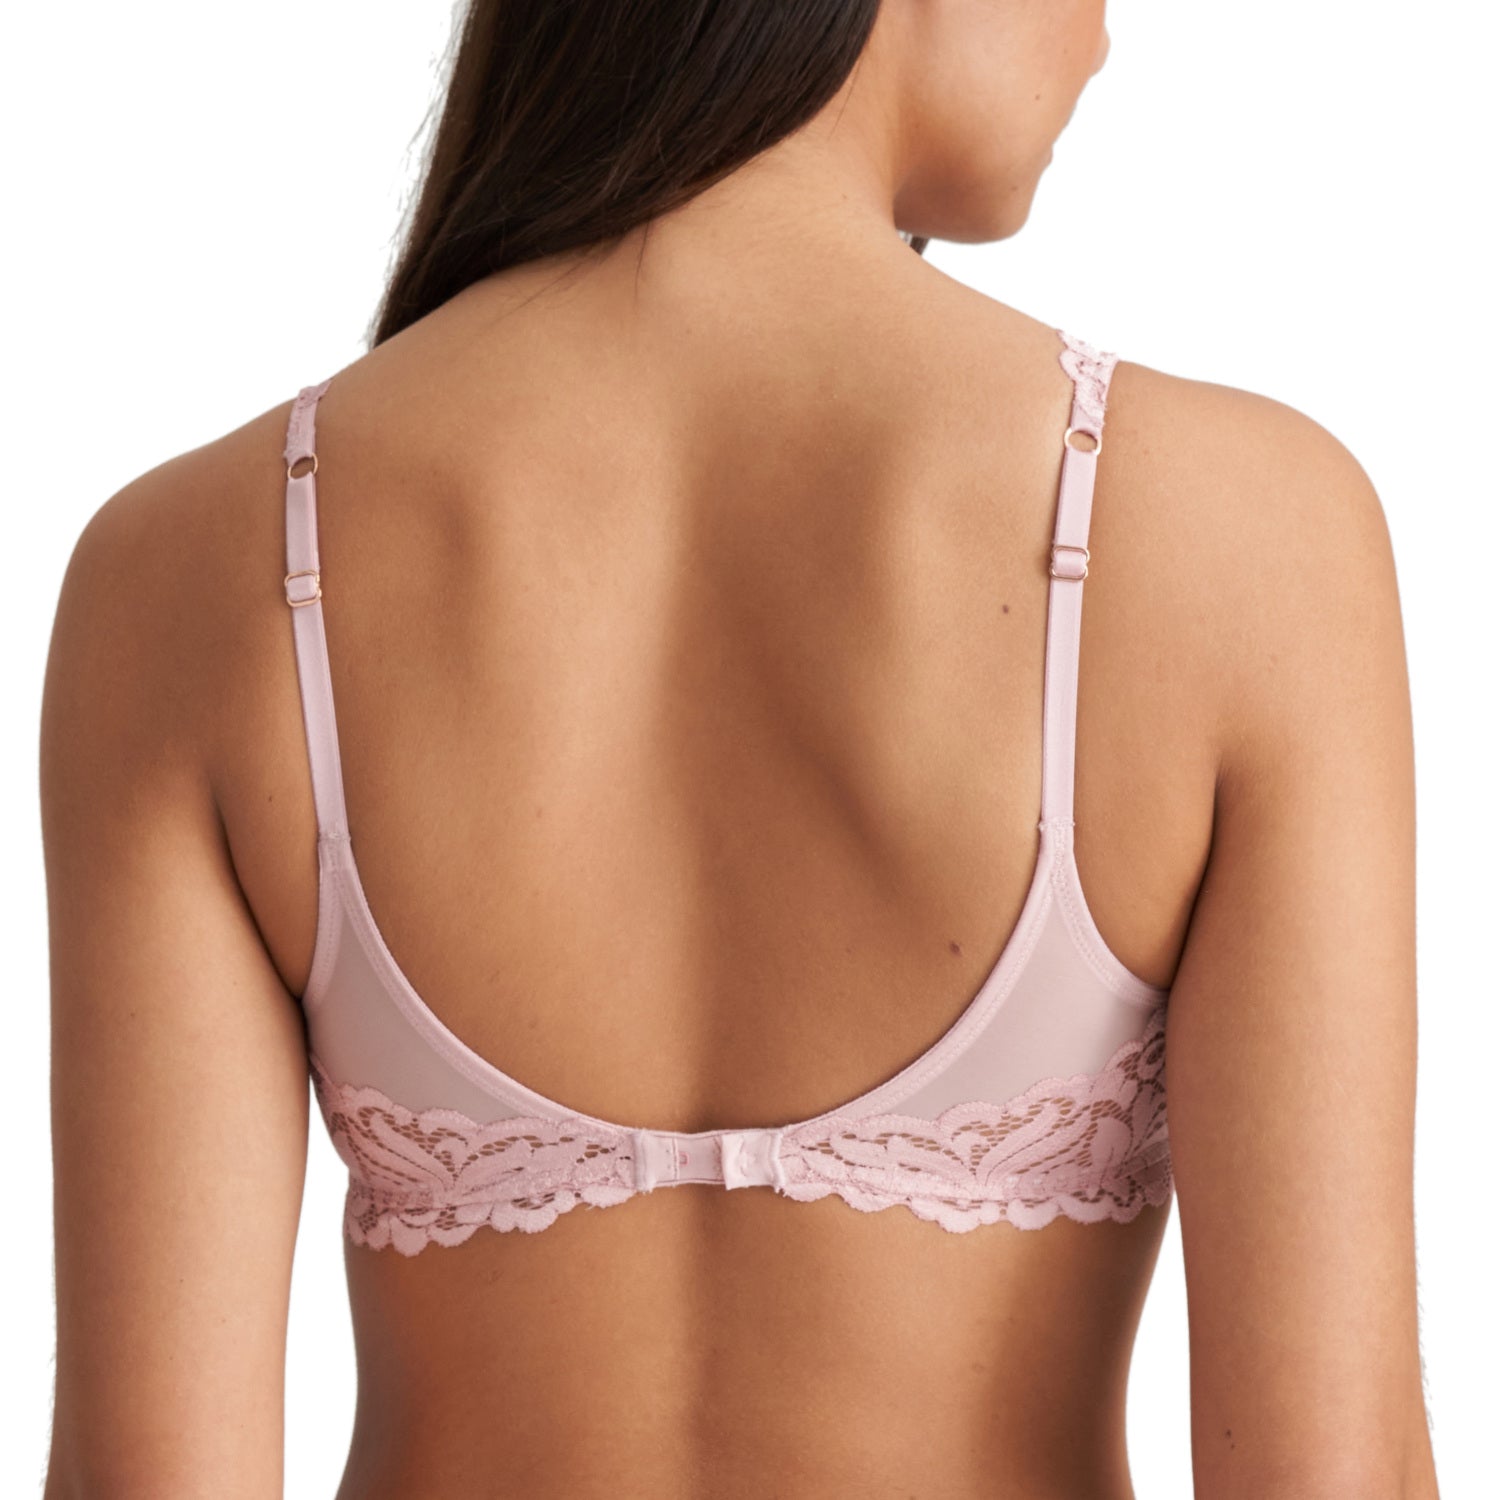 Female Back View Bra Stock Photos - 5,656 Images